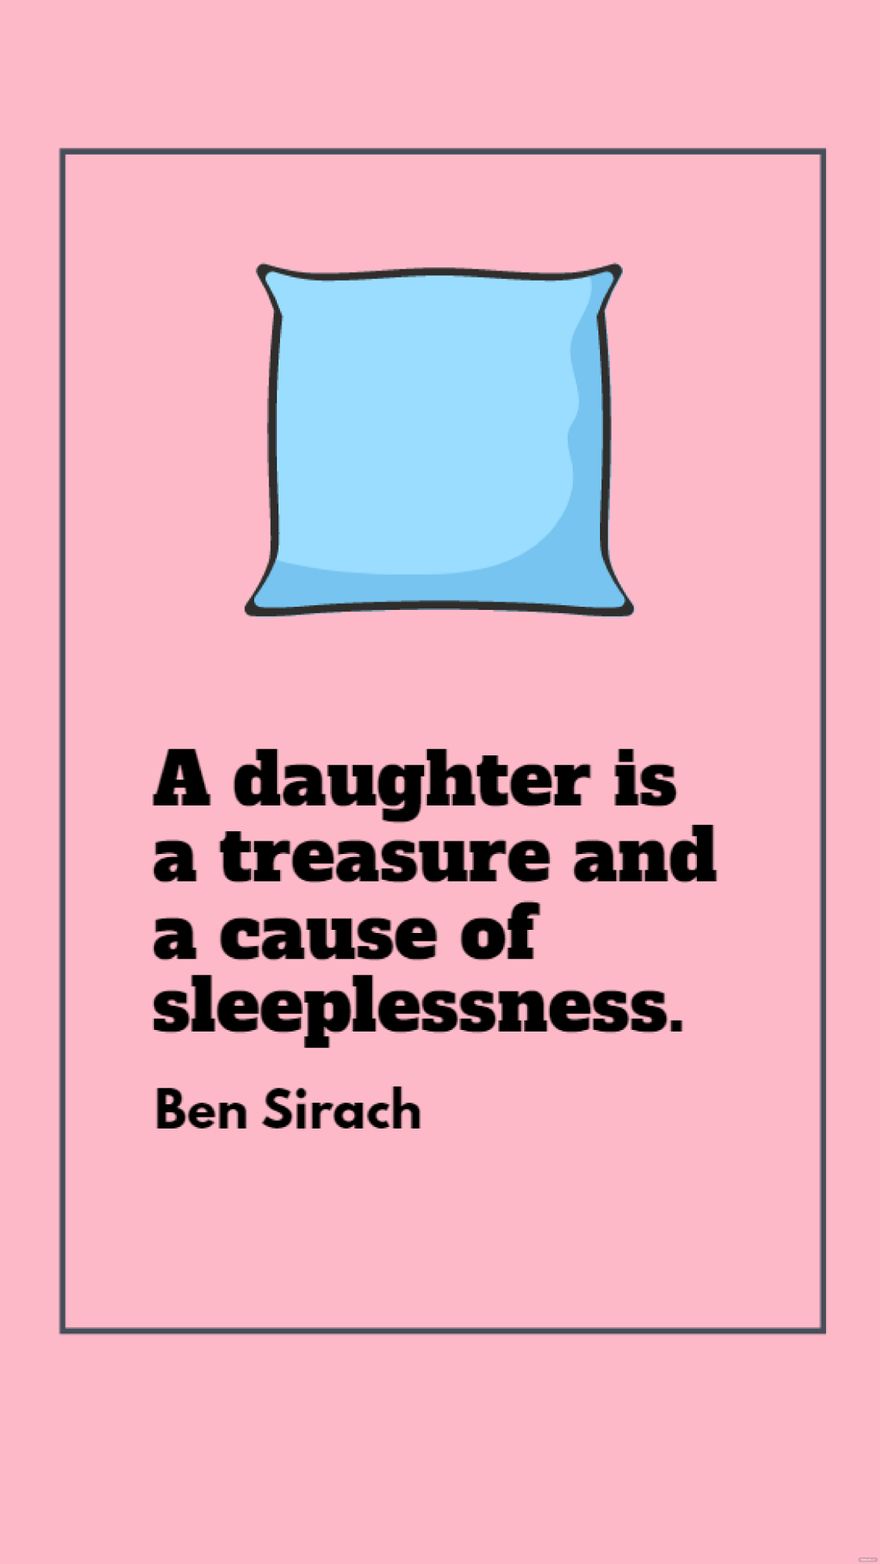 Free Ben Sirach - A daughter is a treasure and a cause of sleeplessness.